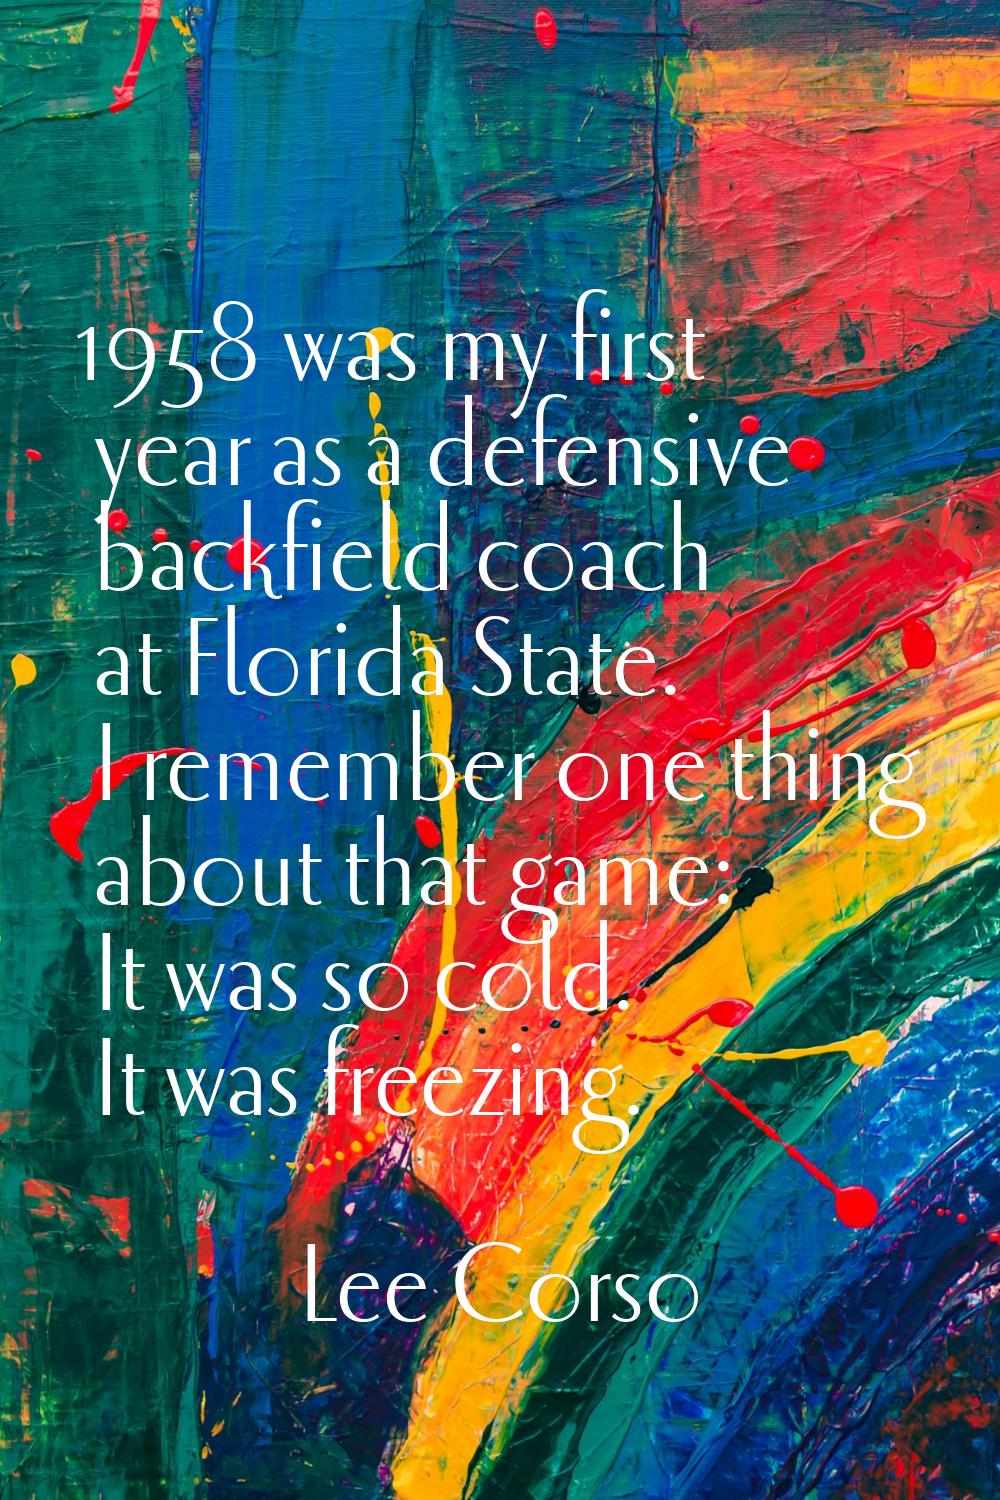 1958 was my first year as a defensive backfield coach at Florida State. I remember one thing about 